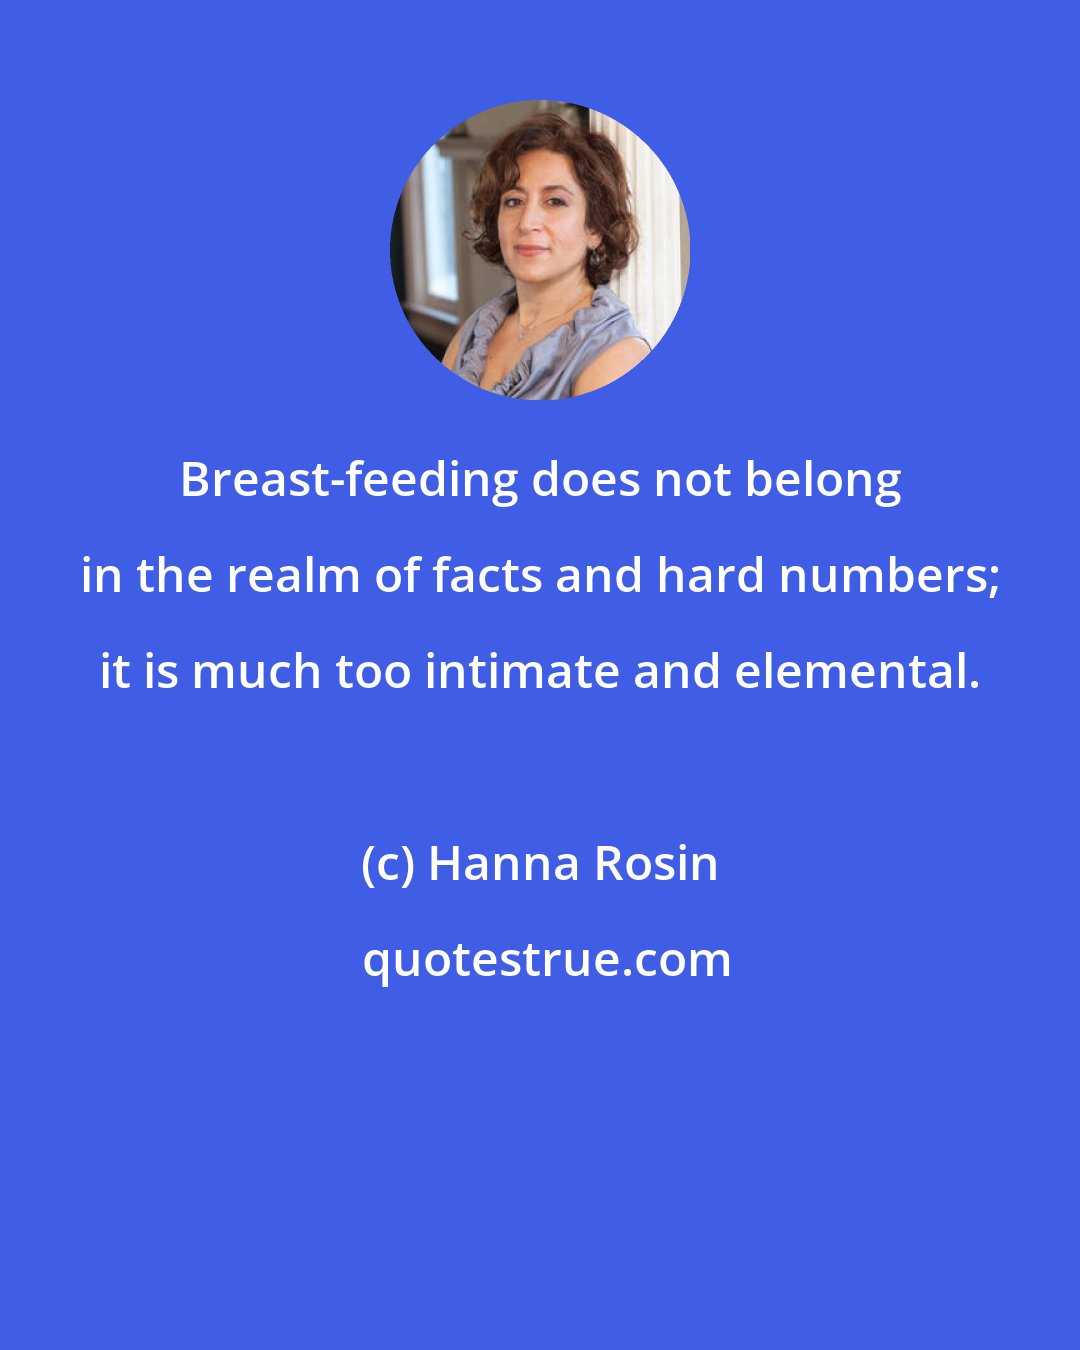 Hanna Rosin: Breast-feeding does not belong in the realm of facts and hard numbers; it is much too intimate and elemental.